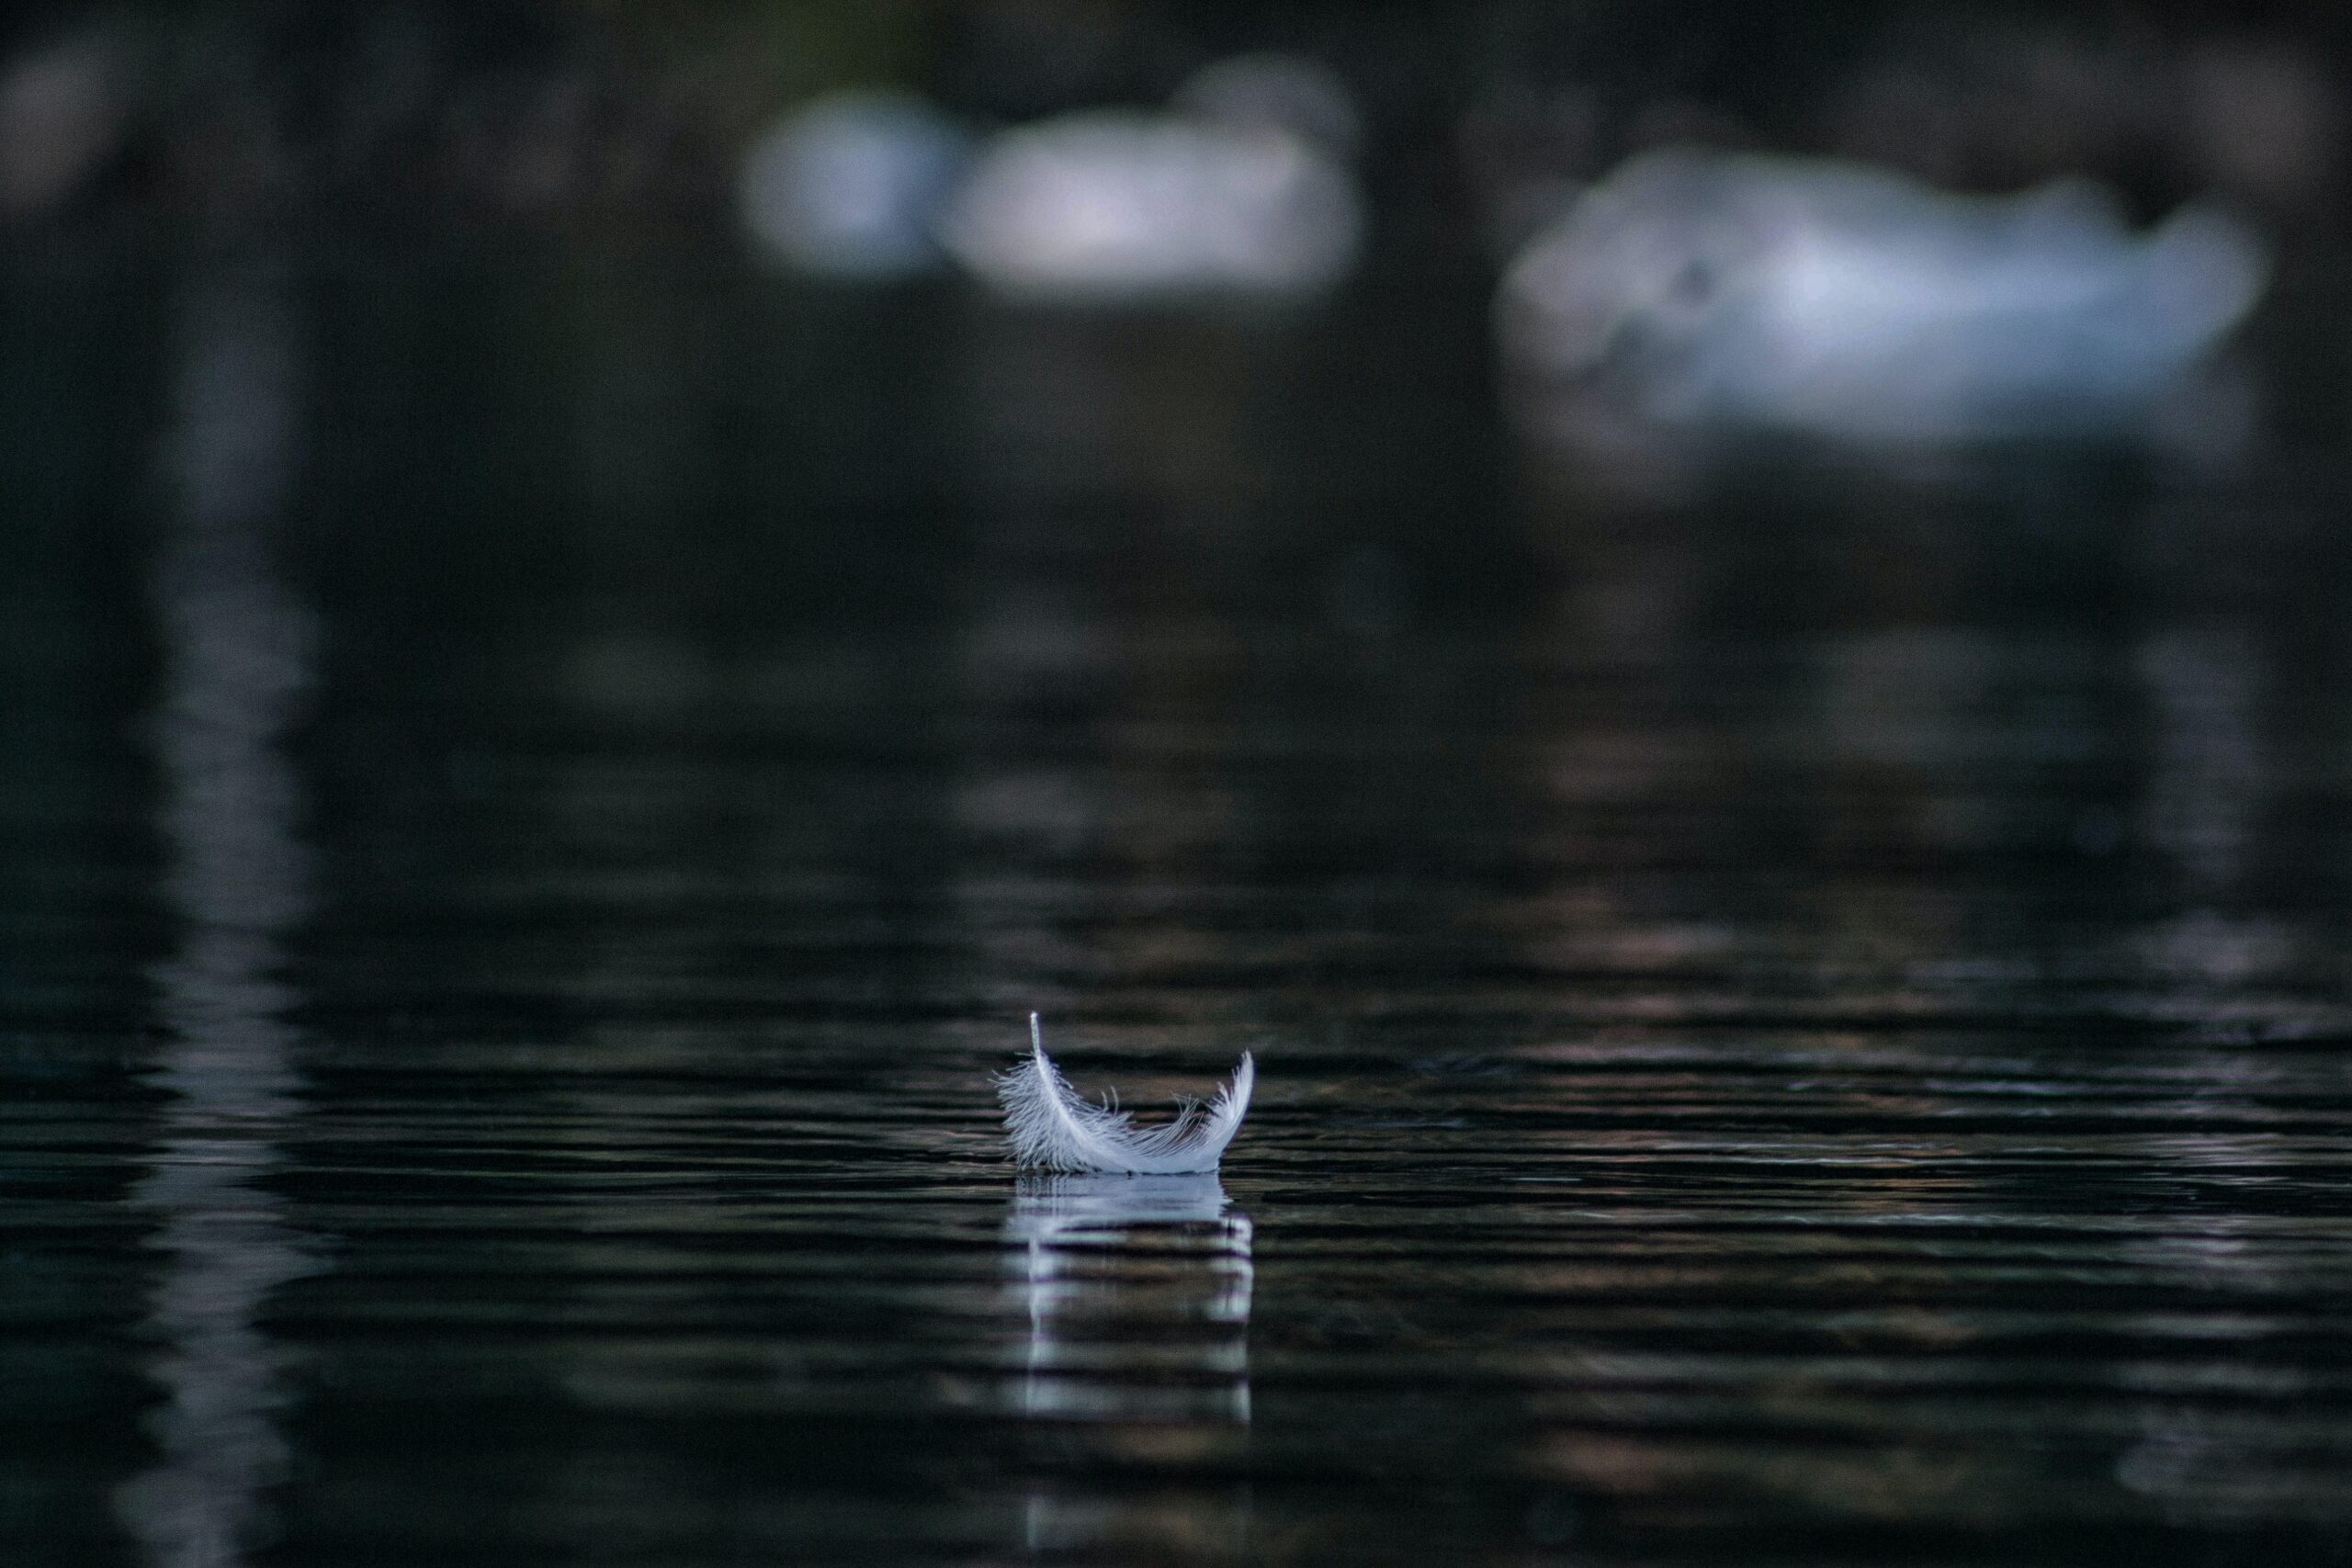 feather on water | Photo by Andraz Lazic on Unsplash